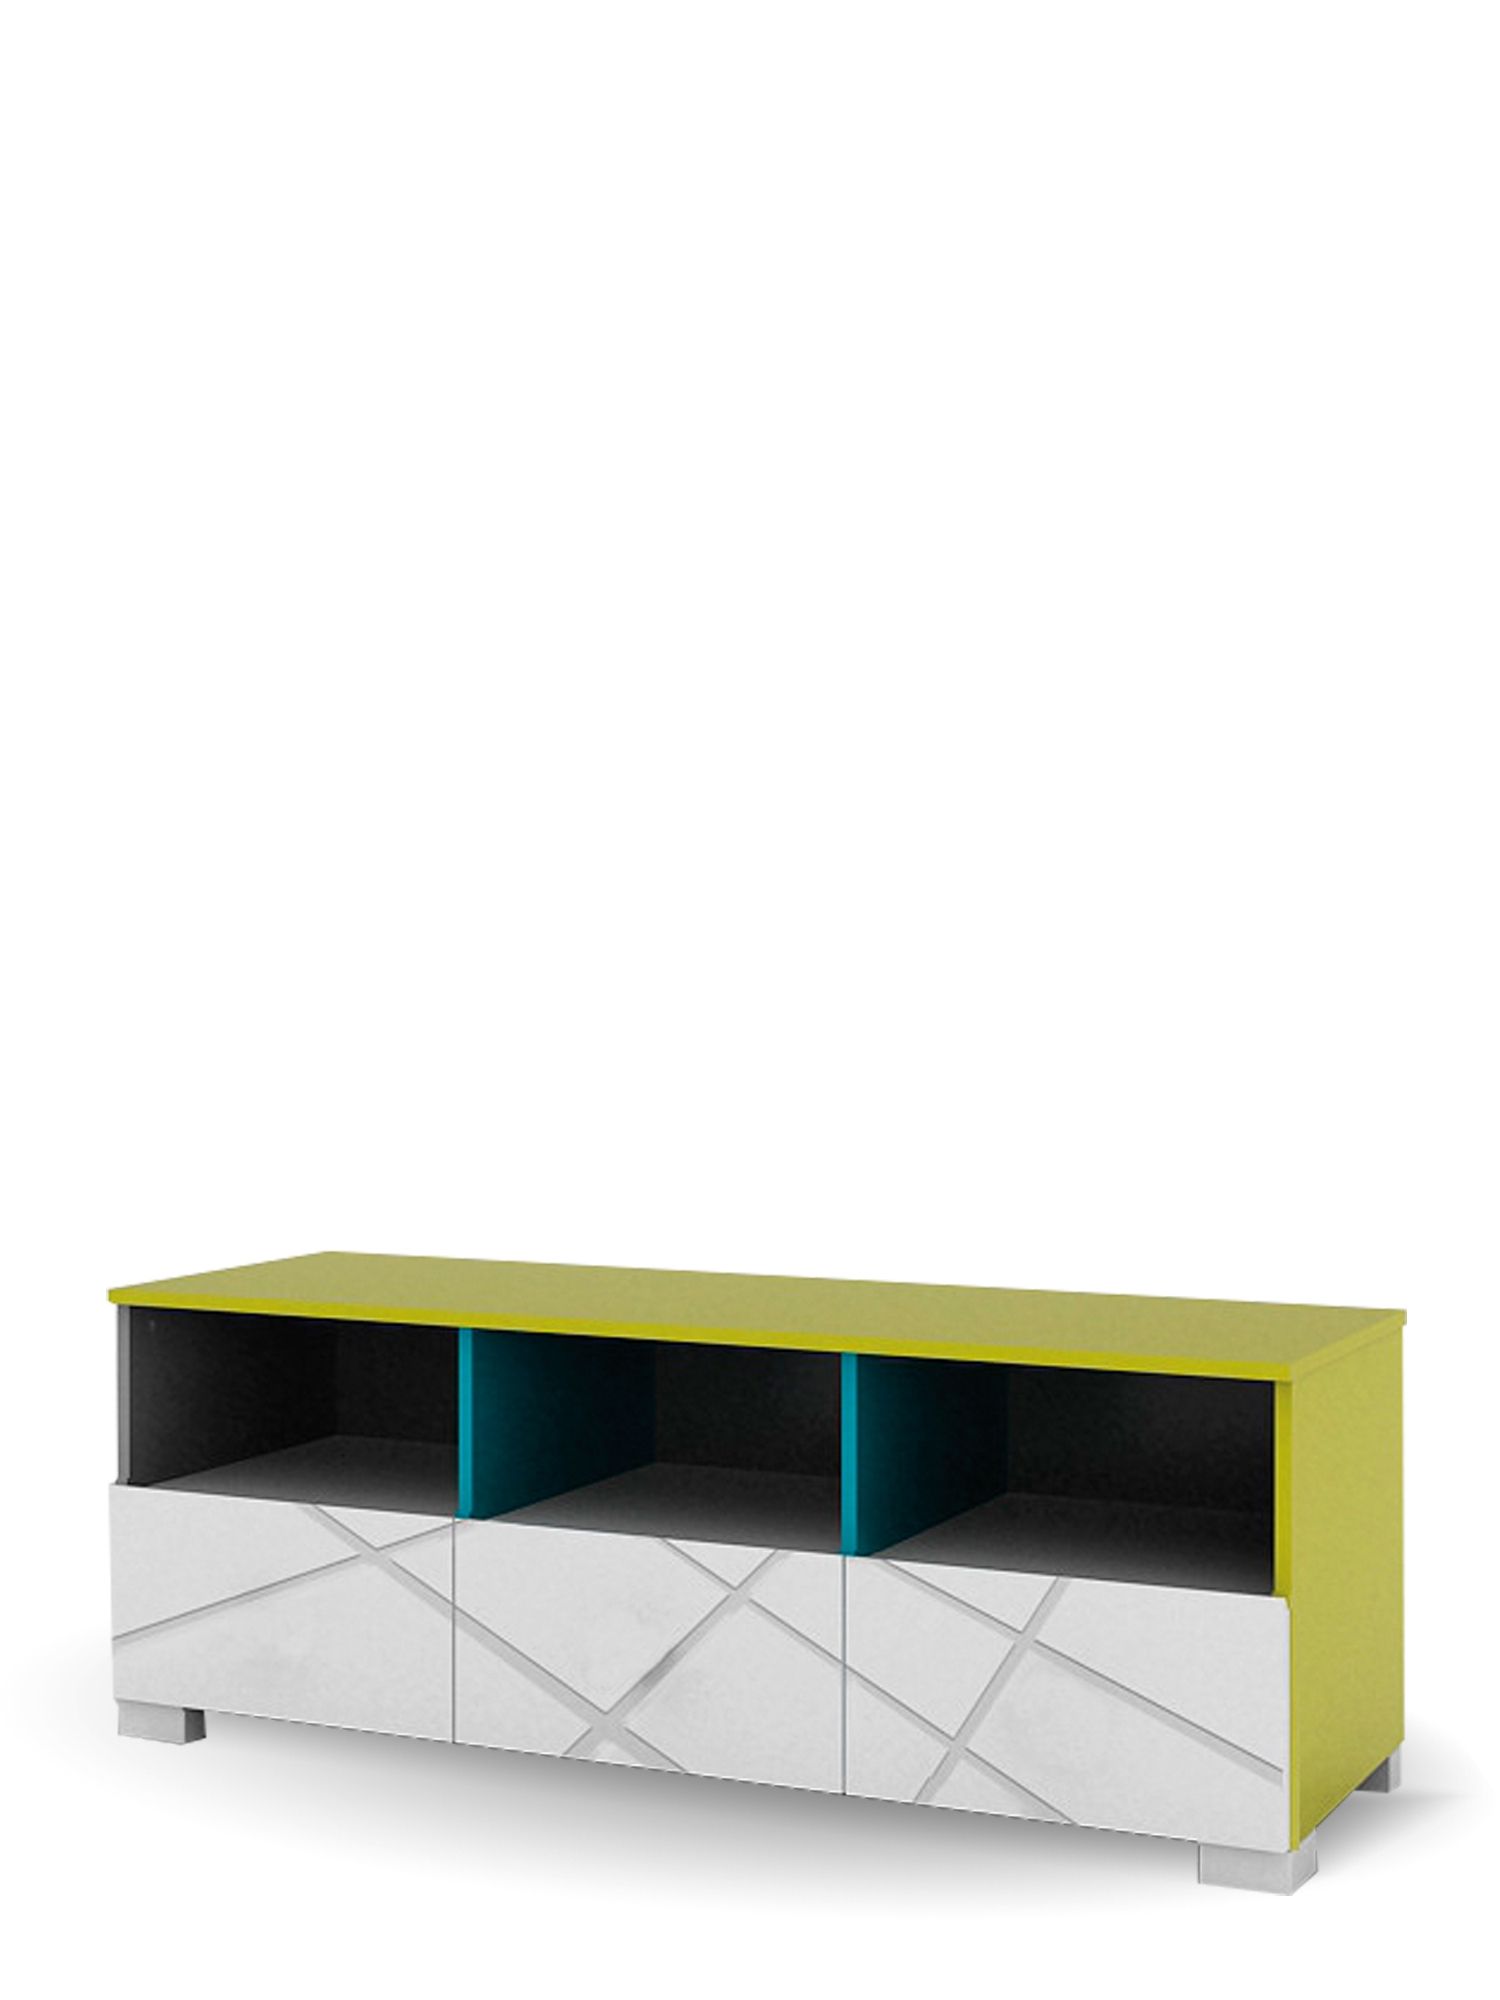 Fashionable Green Tv Stands Throughout Furniture For Teens : X Green Tv Stand Yo  (View 18 of 20)